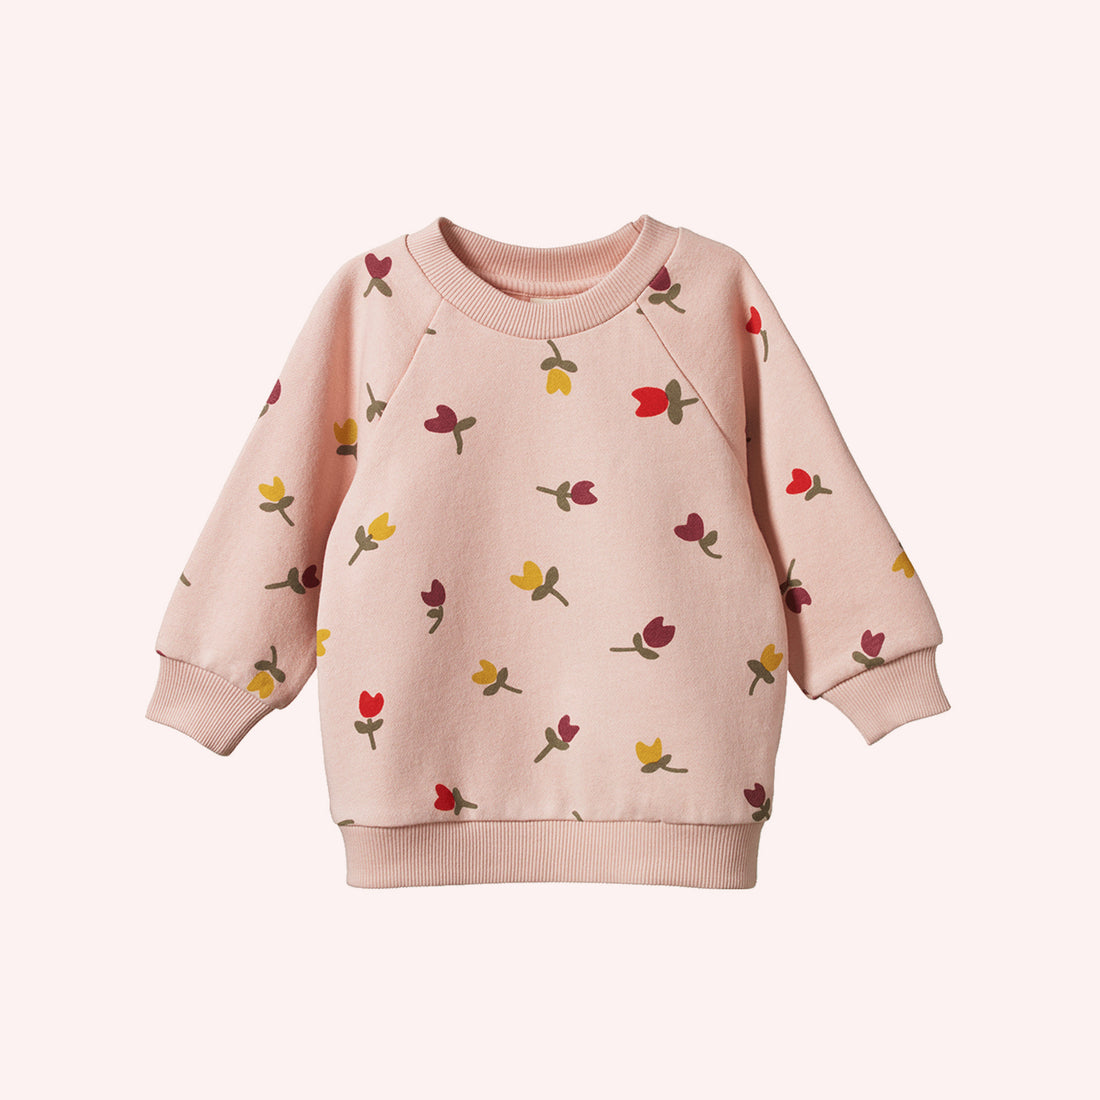 Emerson Sweater - Tulips Rose Dust Print